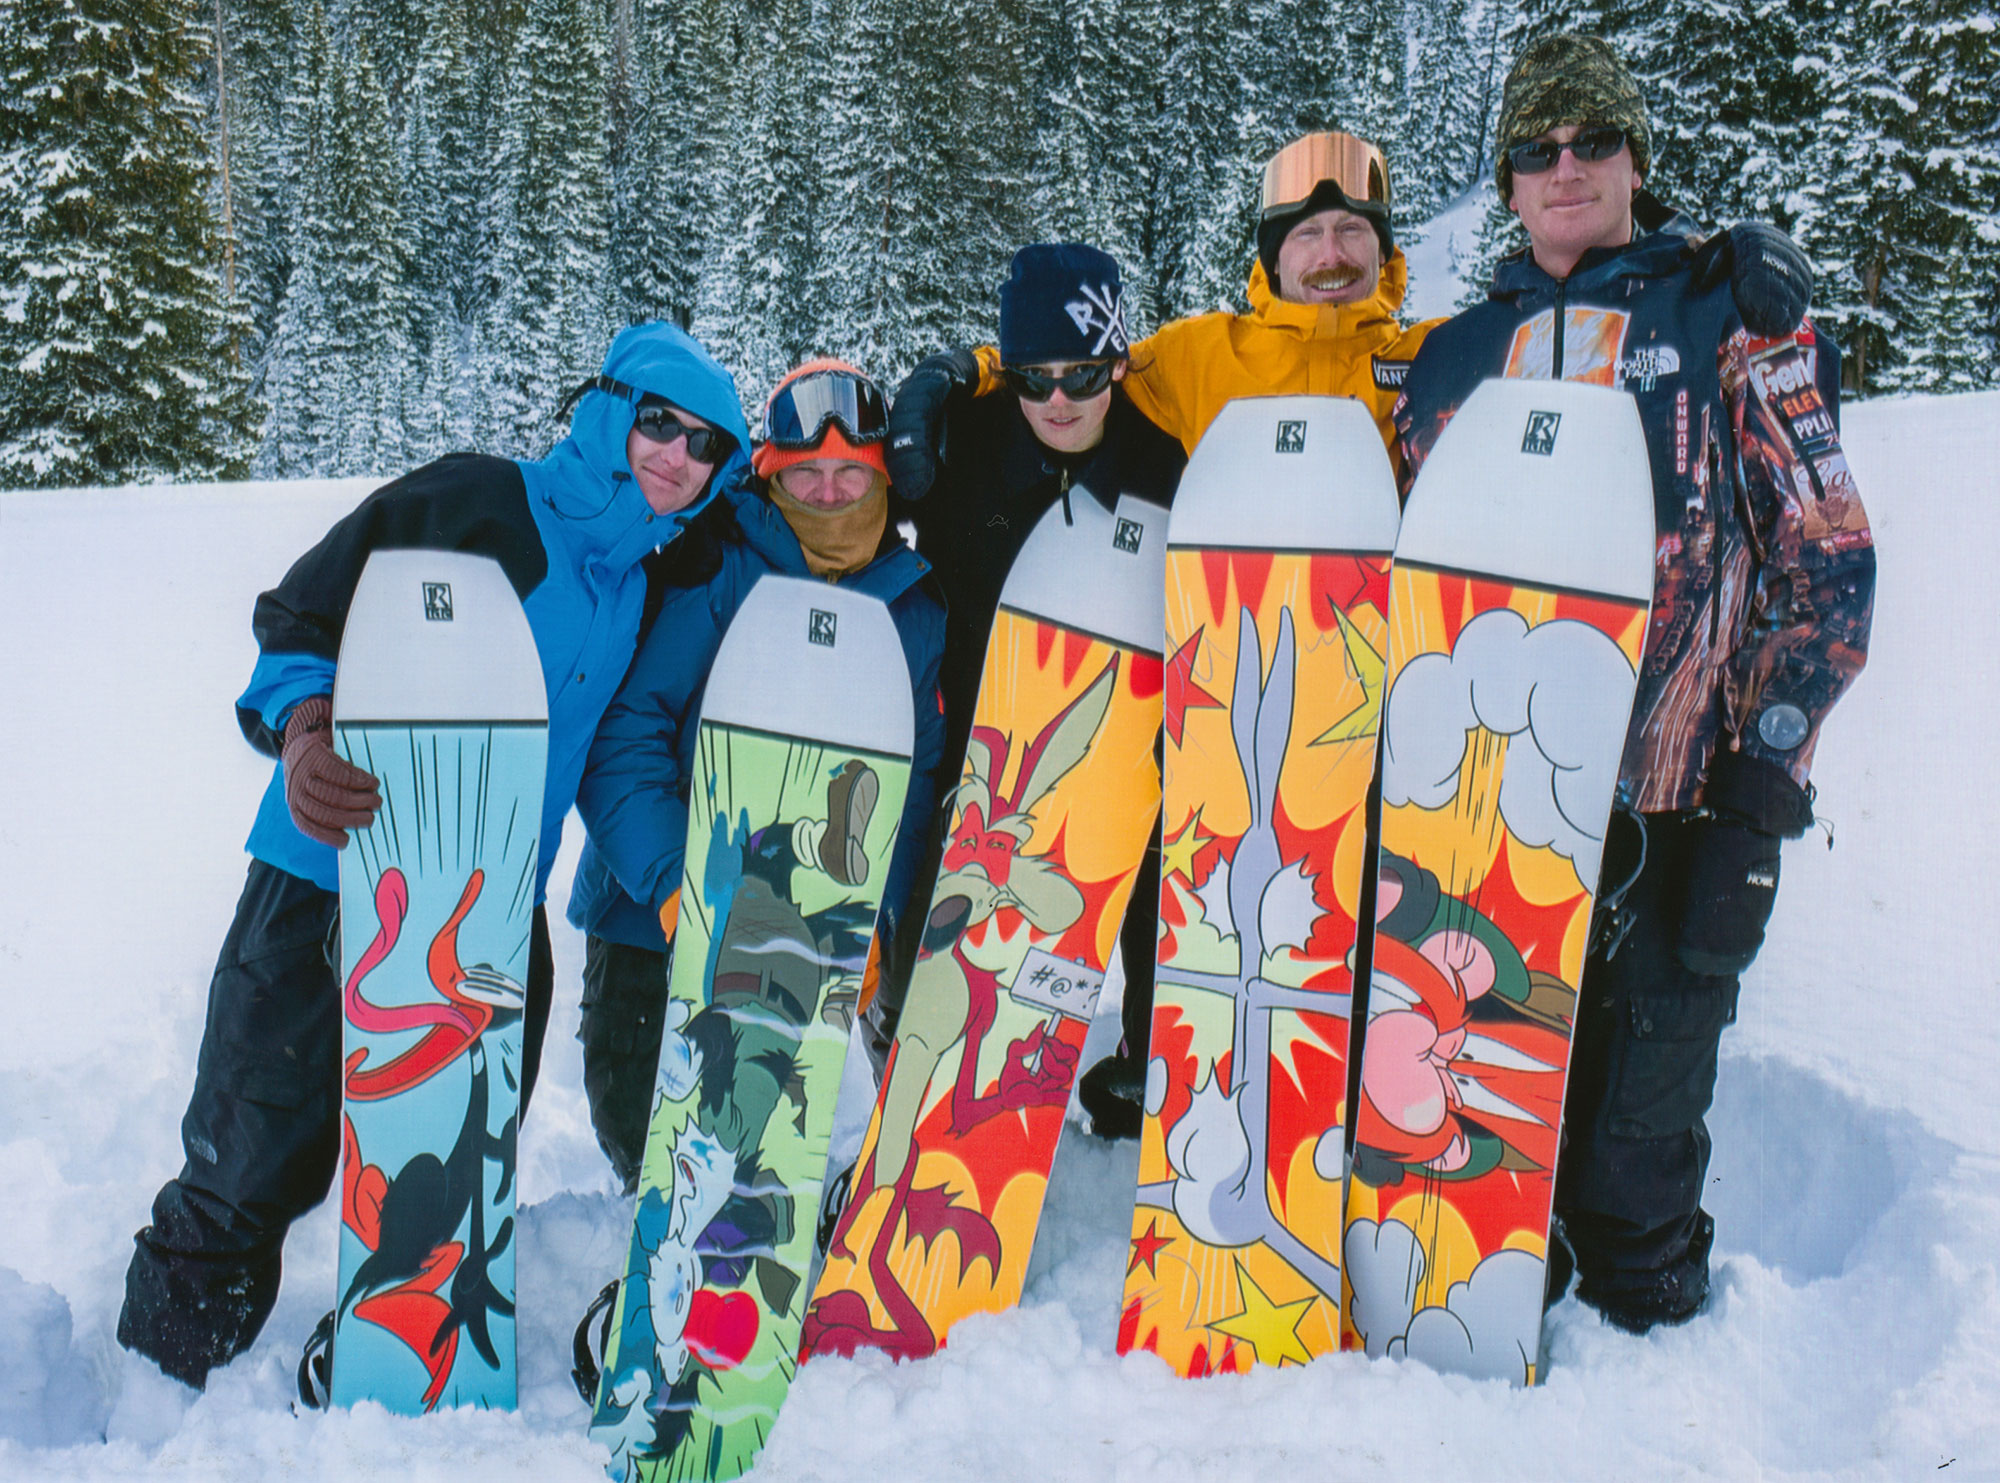 Rated R – Ride Snowboards Announce New Movie – Snowboard Magazine